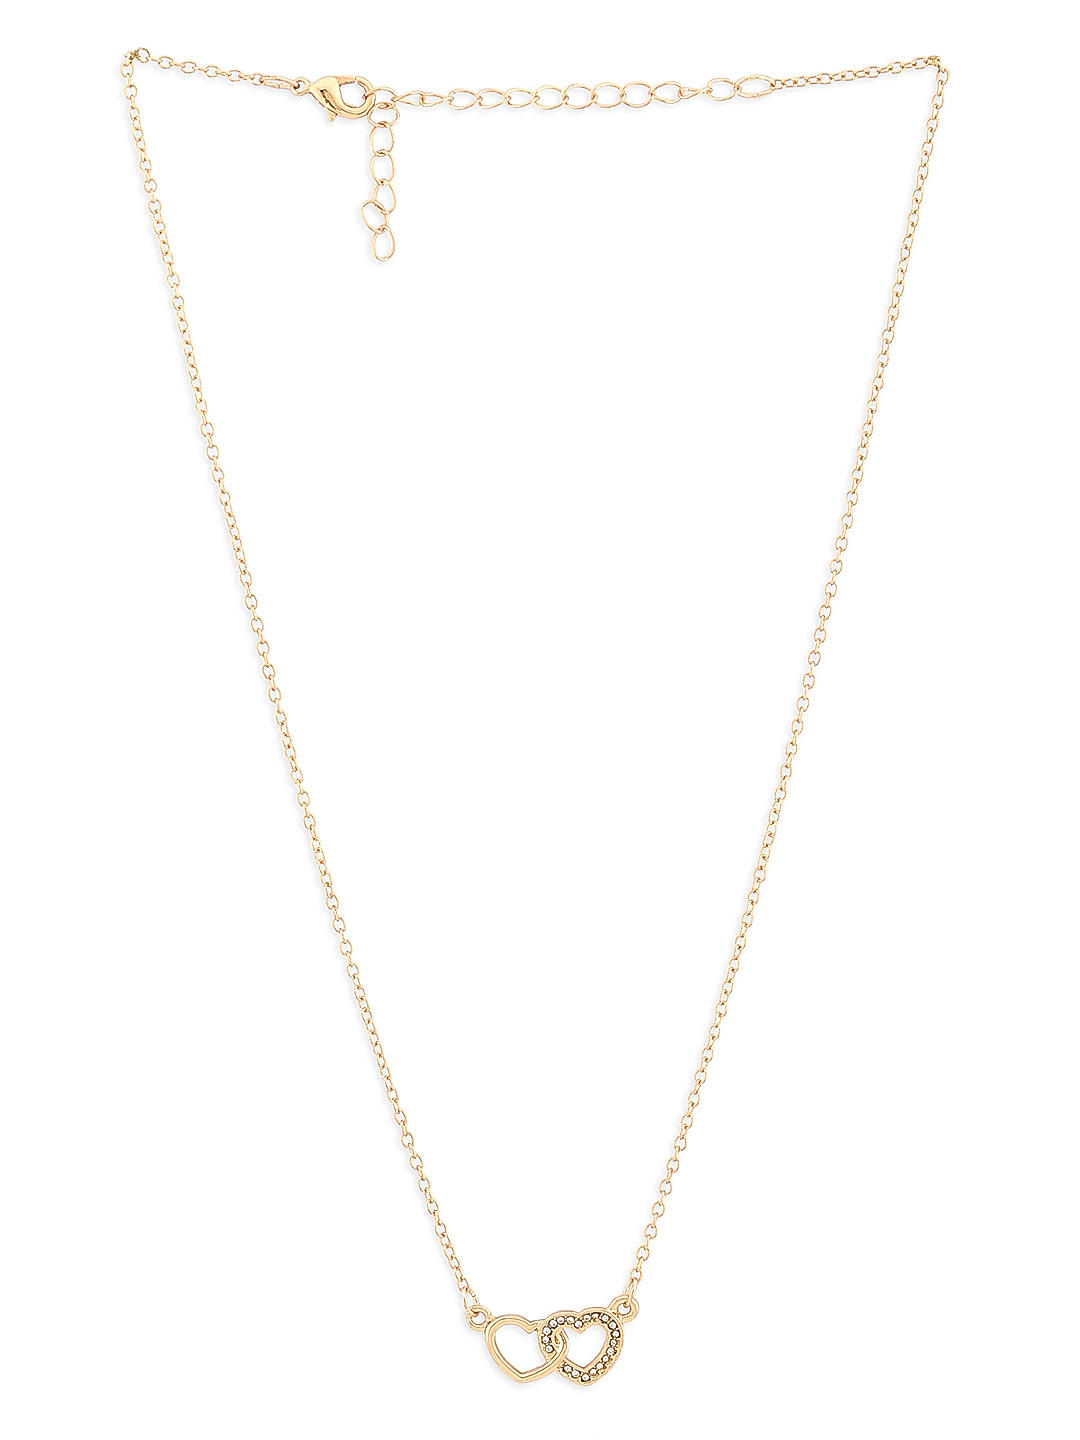 Dainty Gold Heart Necklace for Layering – Sela Designs